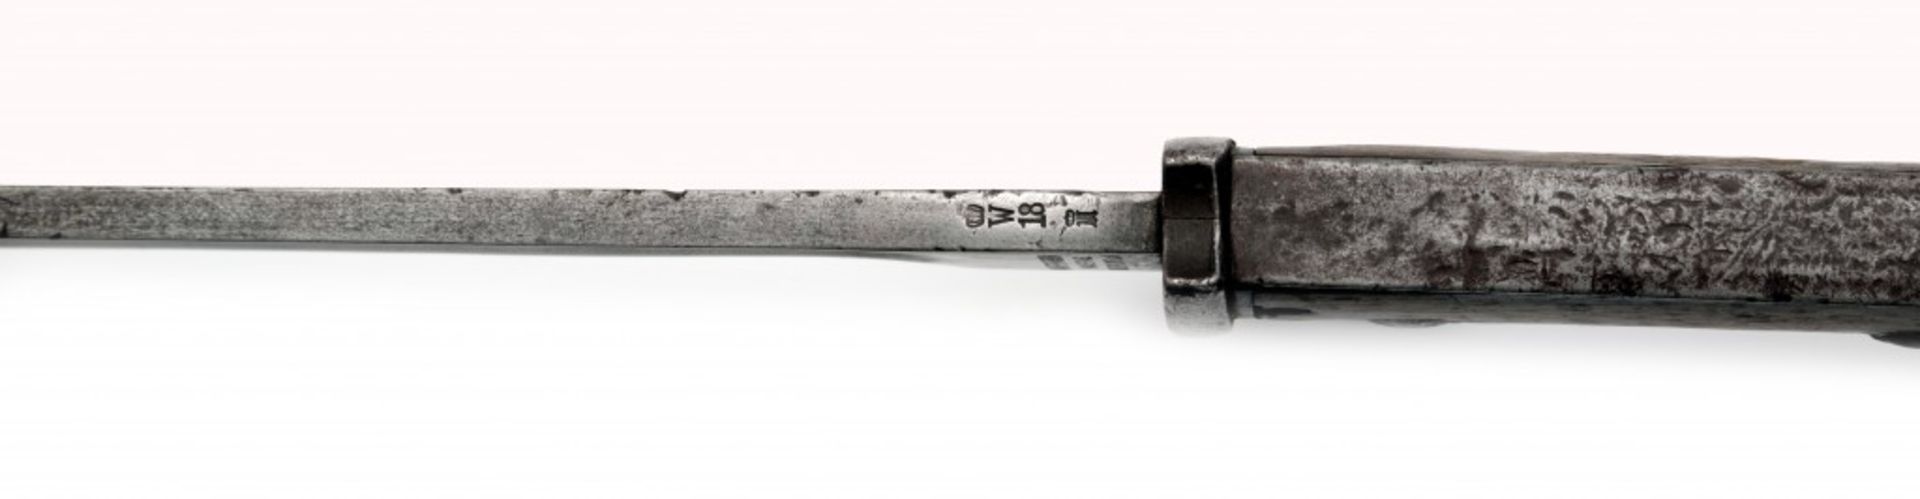 M1898/1905 Mauser Bayonet with Scabbard - Image 3 of 3